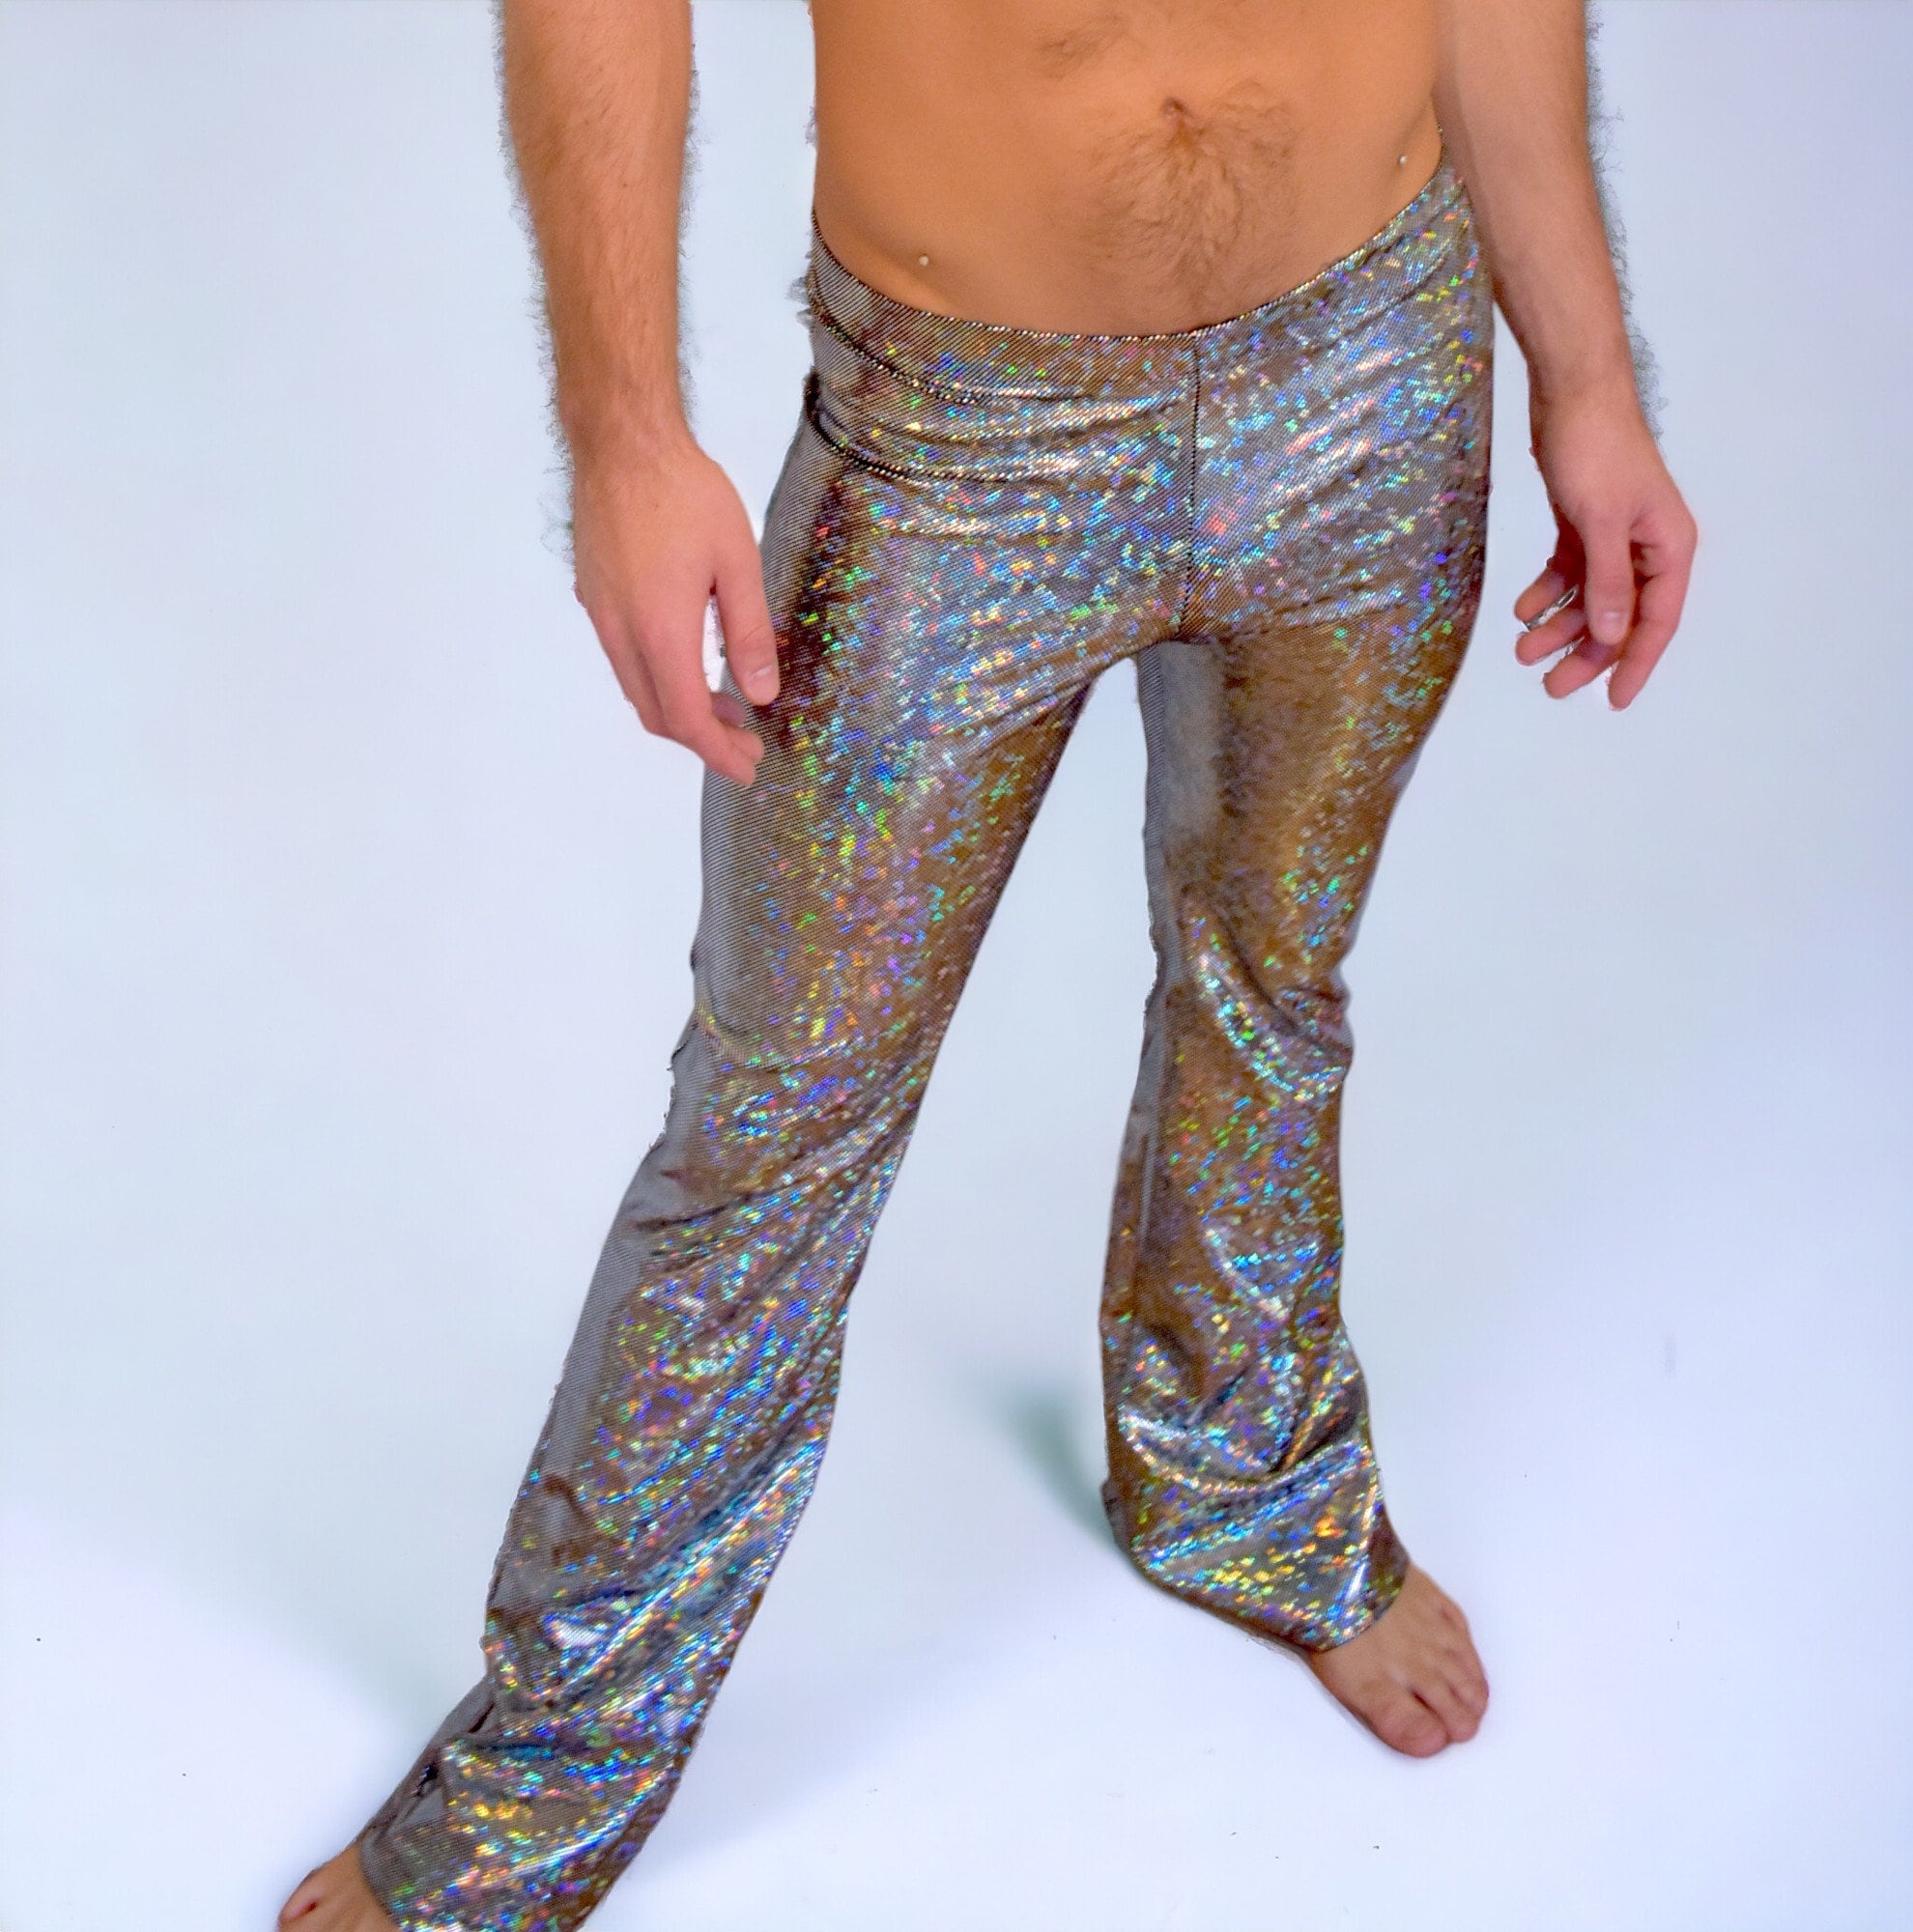 Men's Flare Pants in Silver on Black Holographic Shattered Glass, Rave  Clothing, Festival Burning Man 